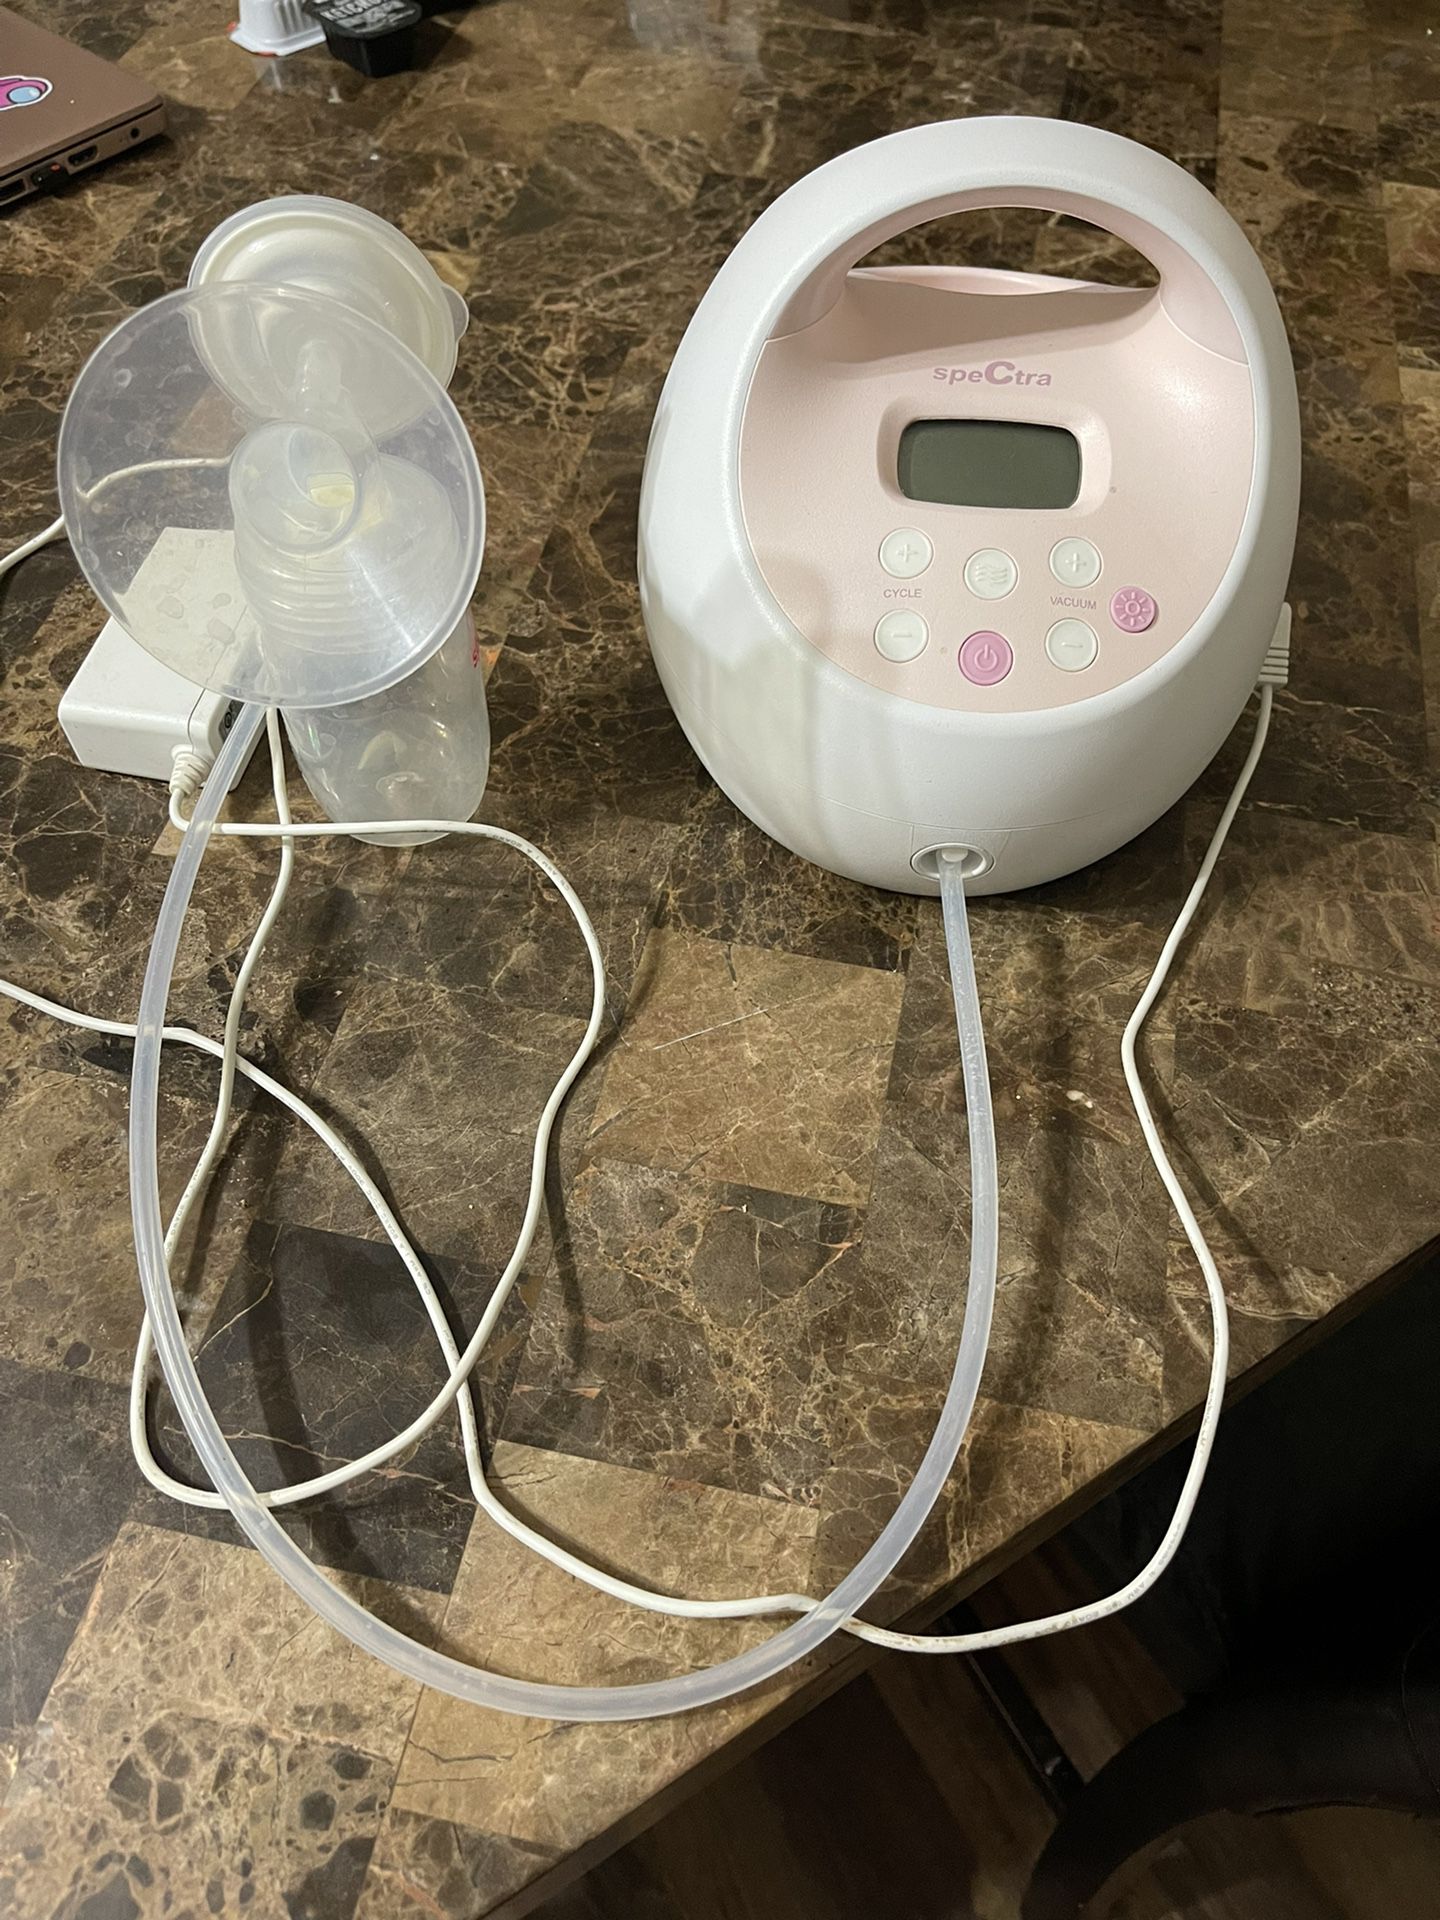 Spectra Breast Pump Has All The Pieces Even Box That It Came In